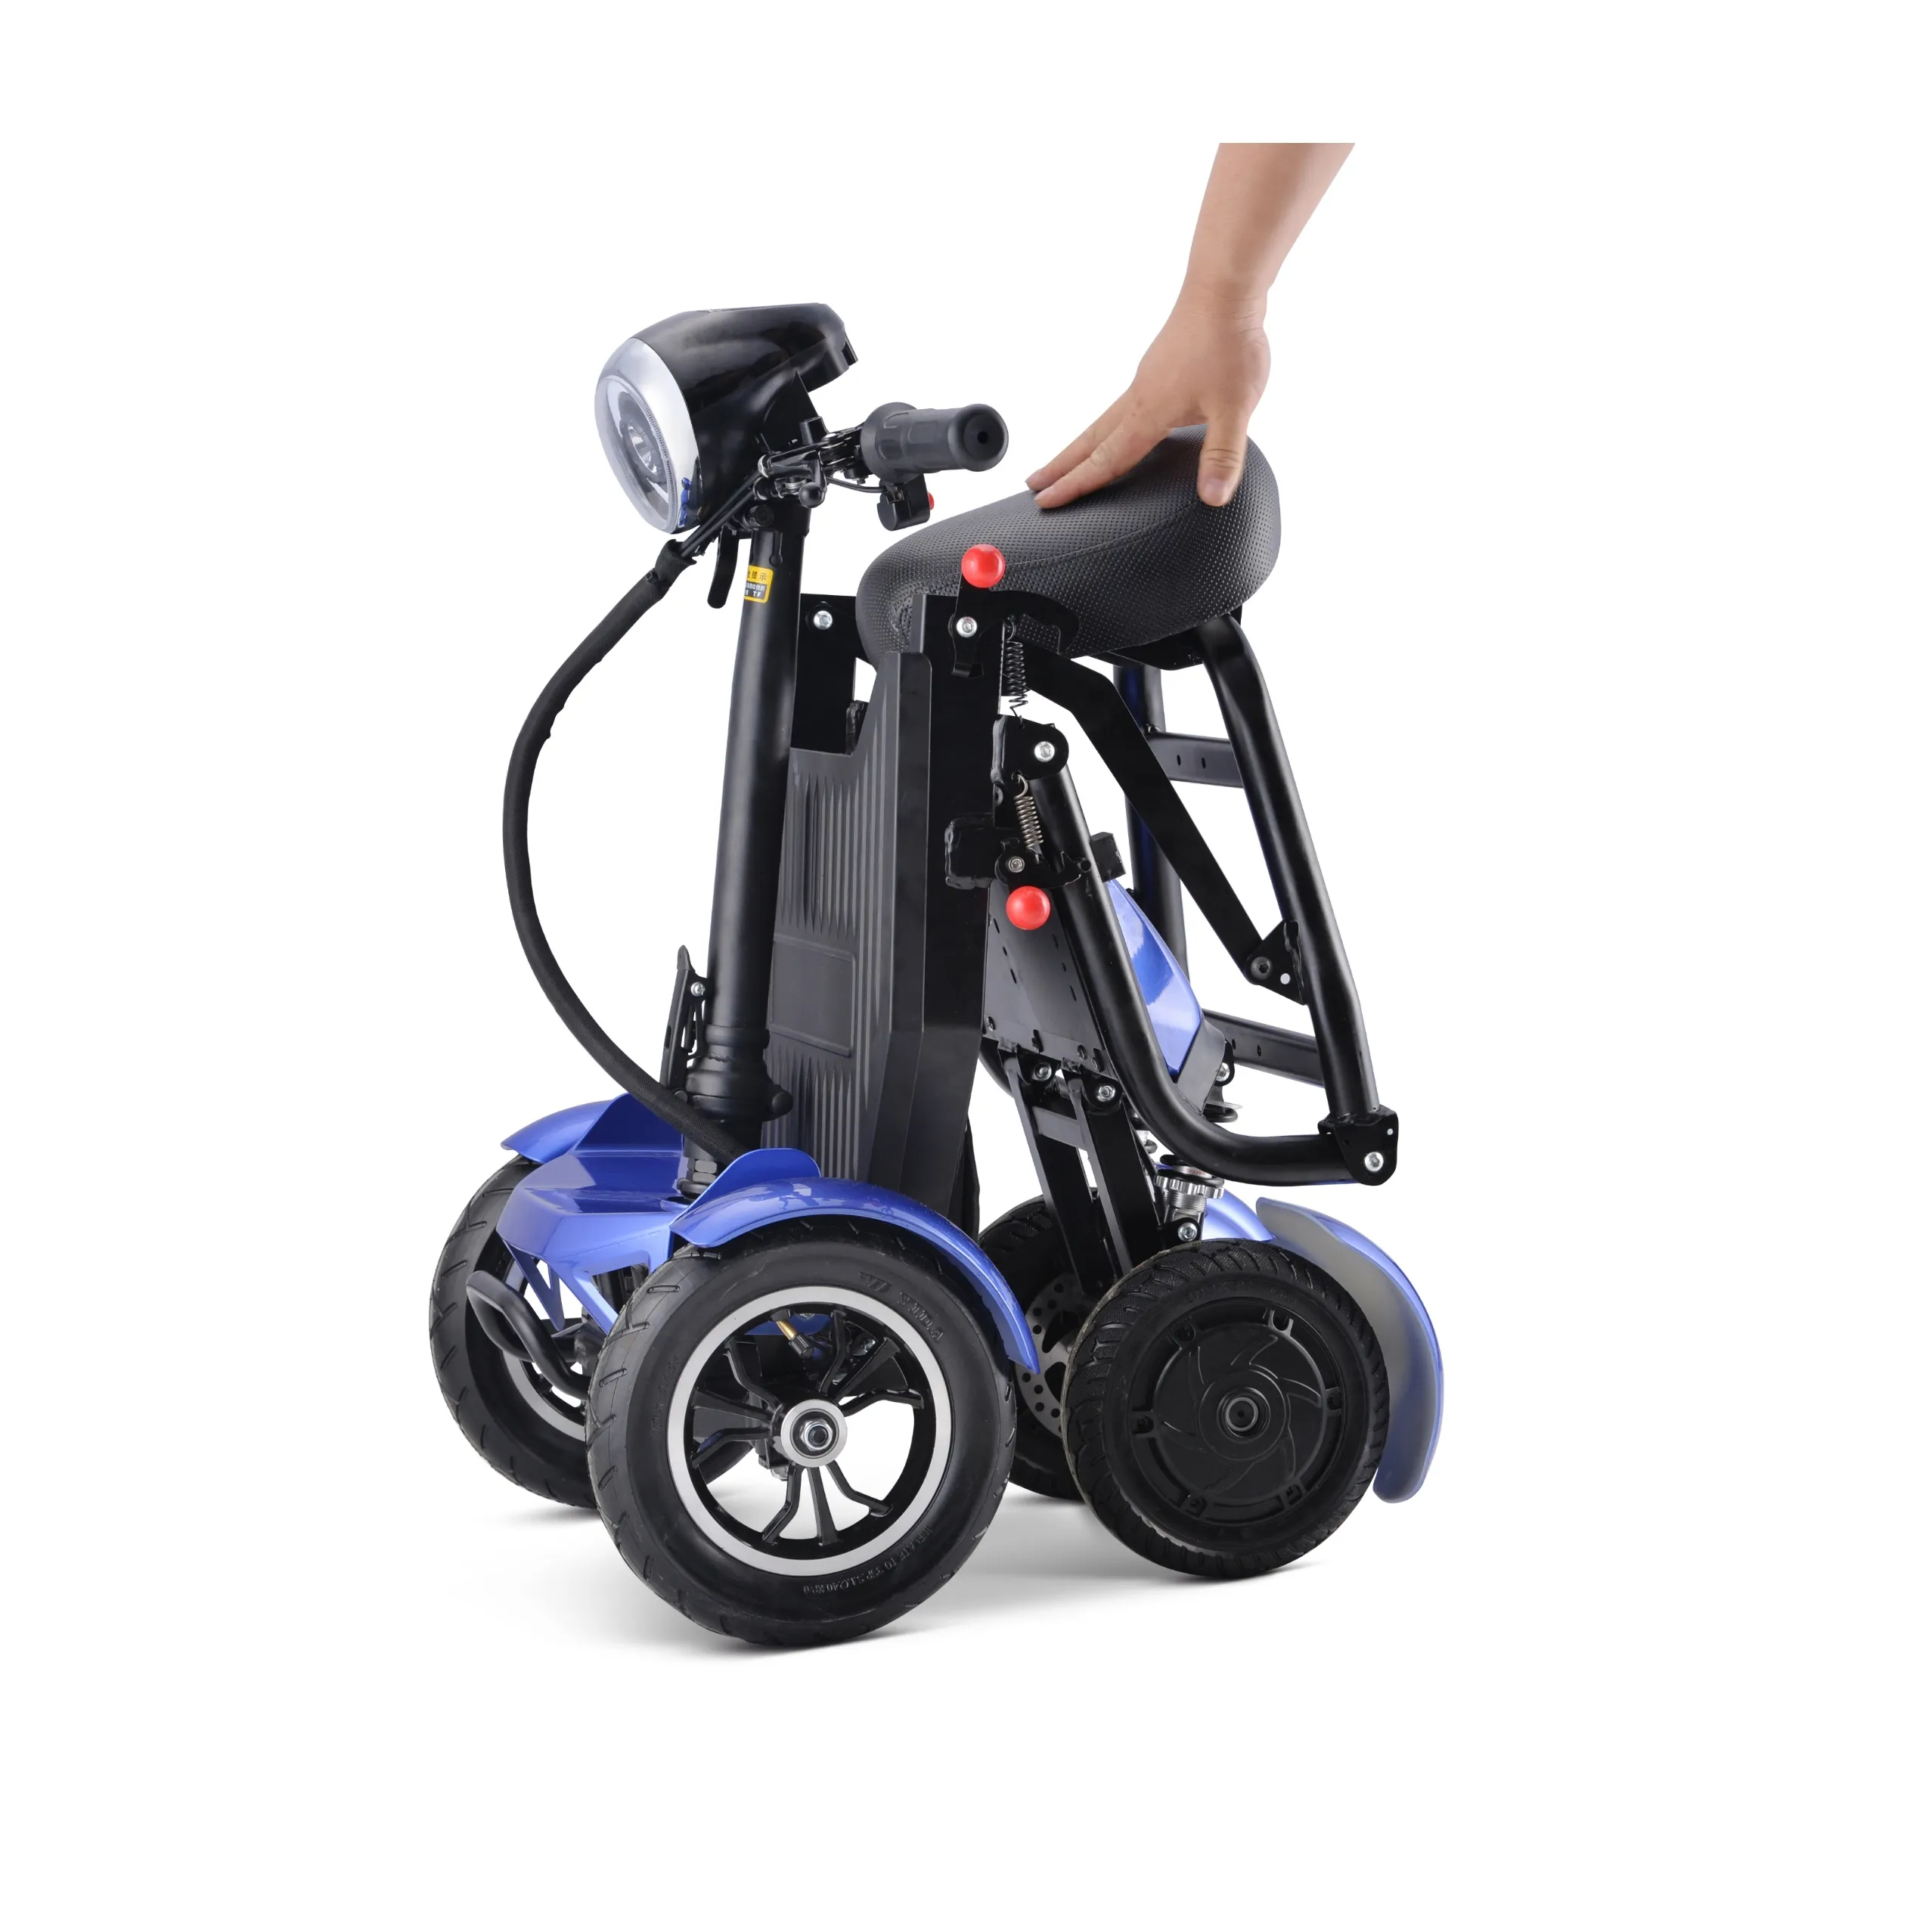 Foldable Electric Motorcycle Scooter Black Motor Power Battery four wheel electric Mobility scooter